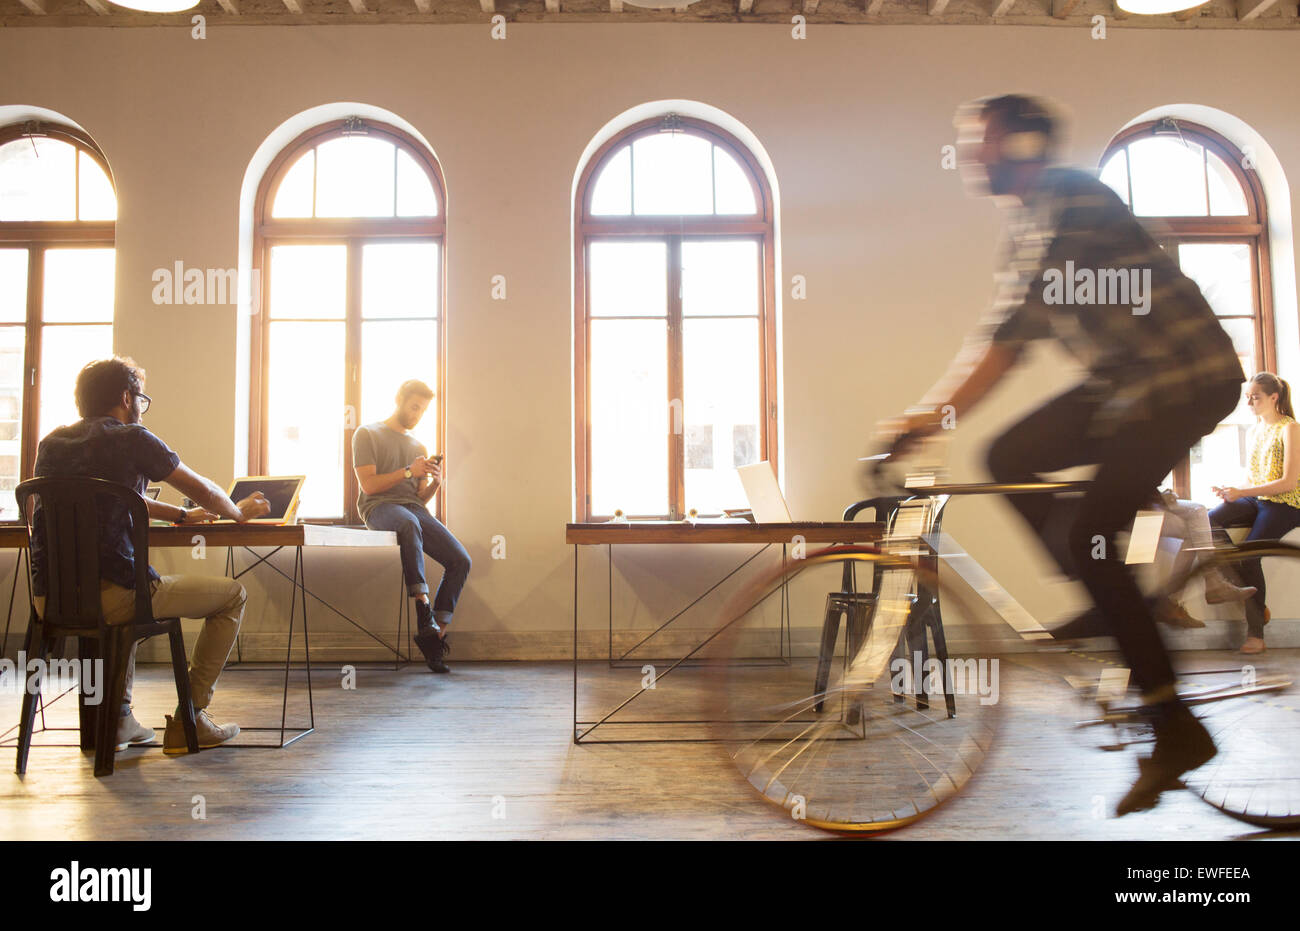 Businessman riding bicycle in open office Banque D'Images